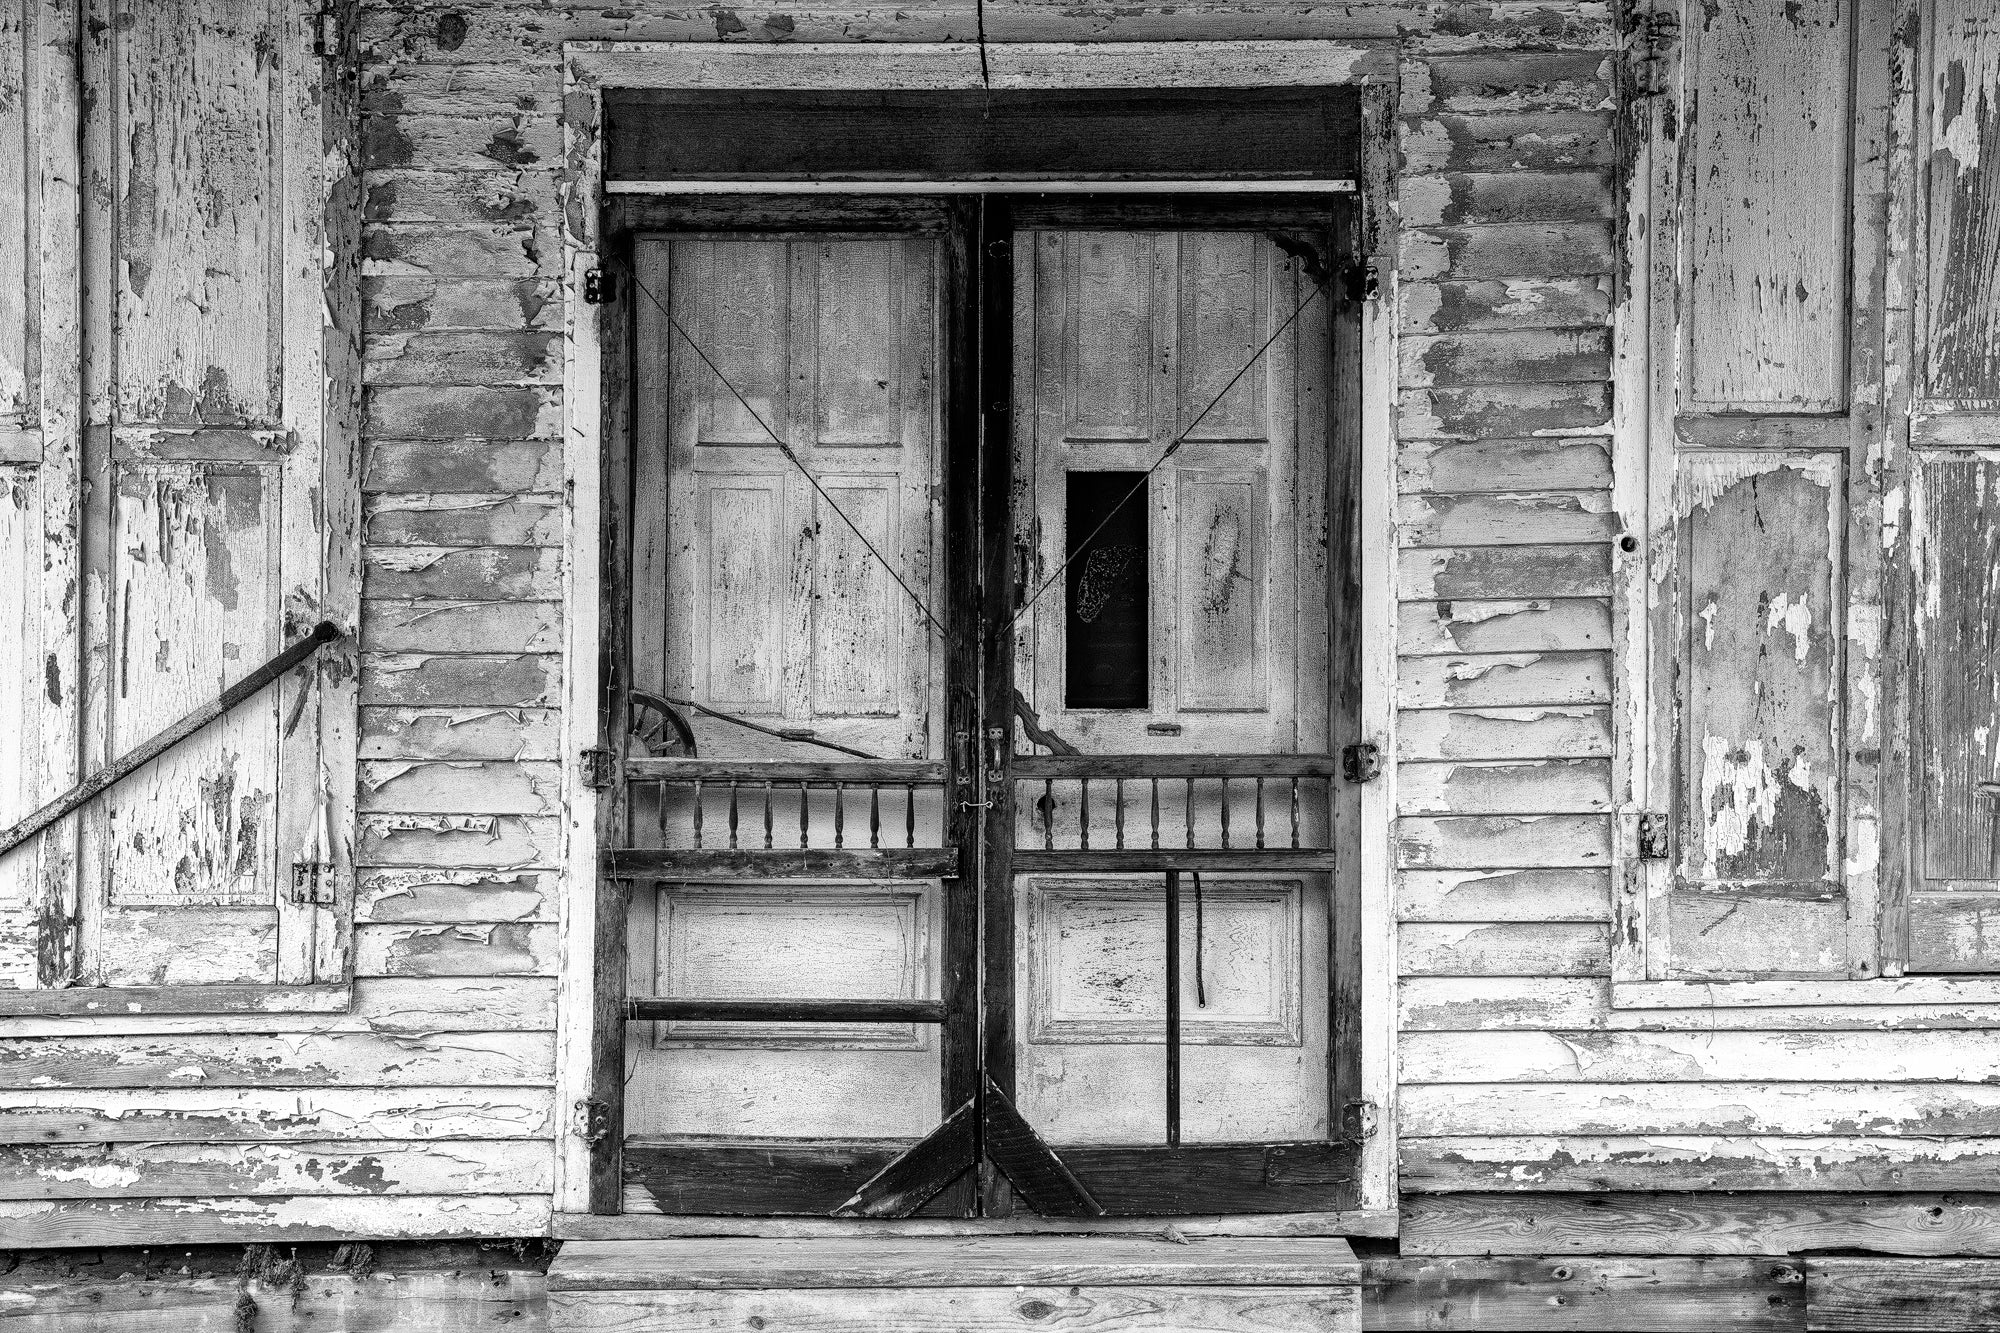 Tattered Screen Doors on an Abandoned Country Store: Black and White Photograph by Keith Dotson. Buy a fine art print here.